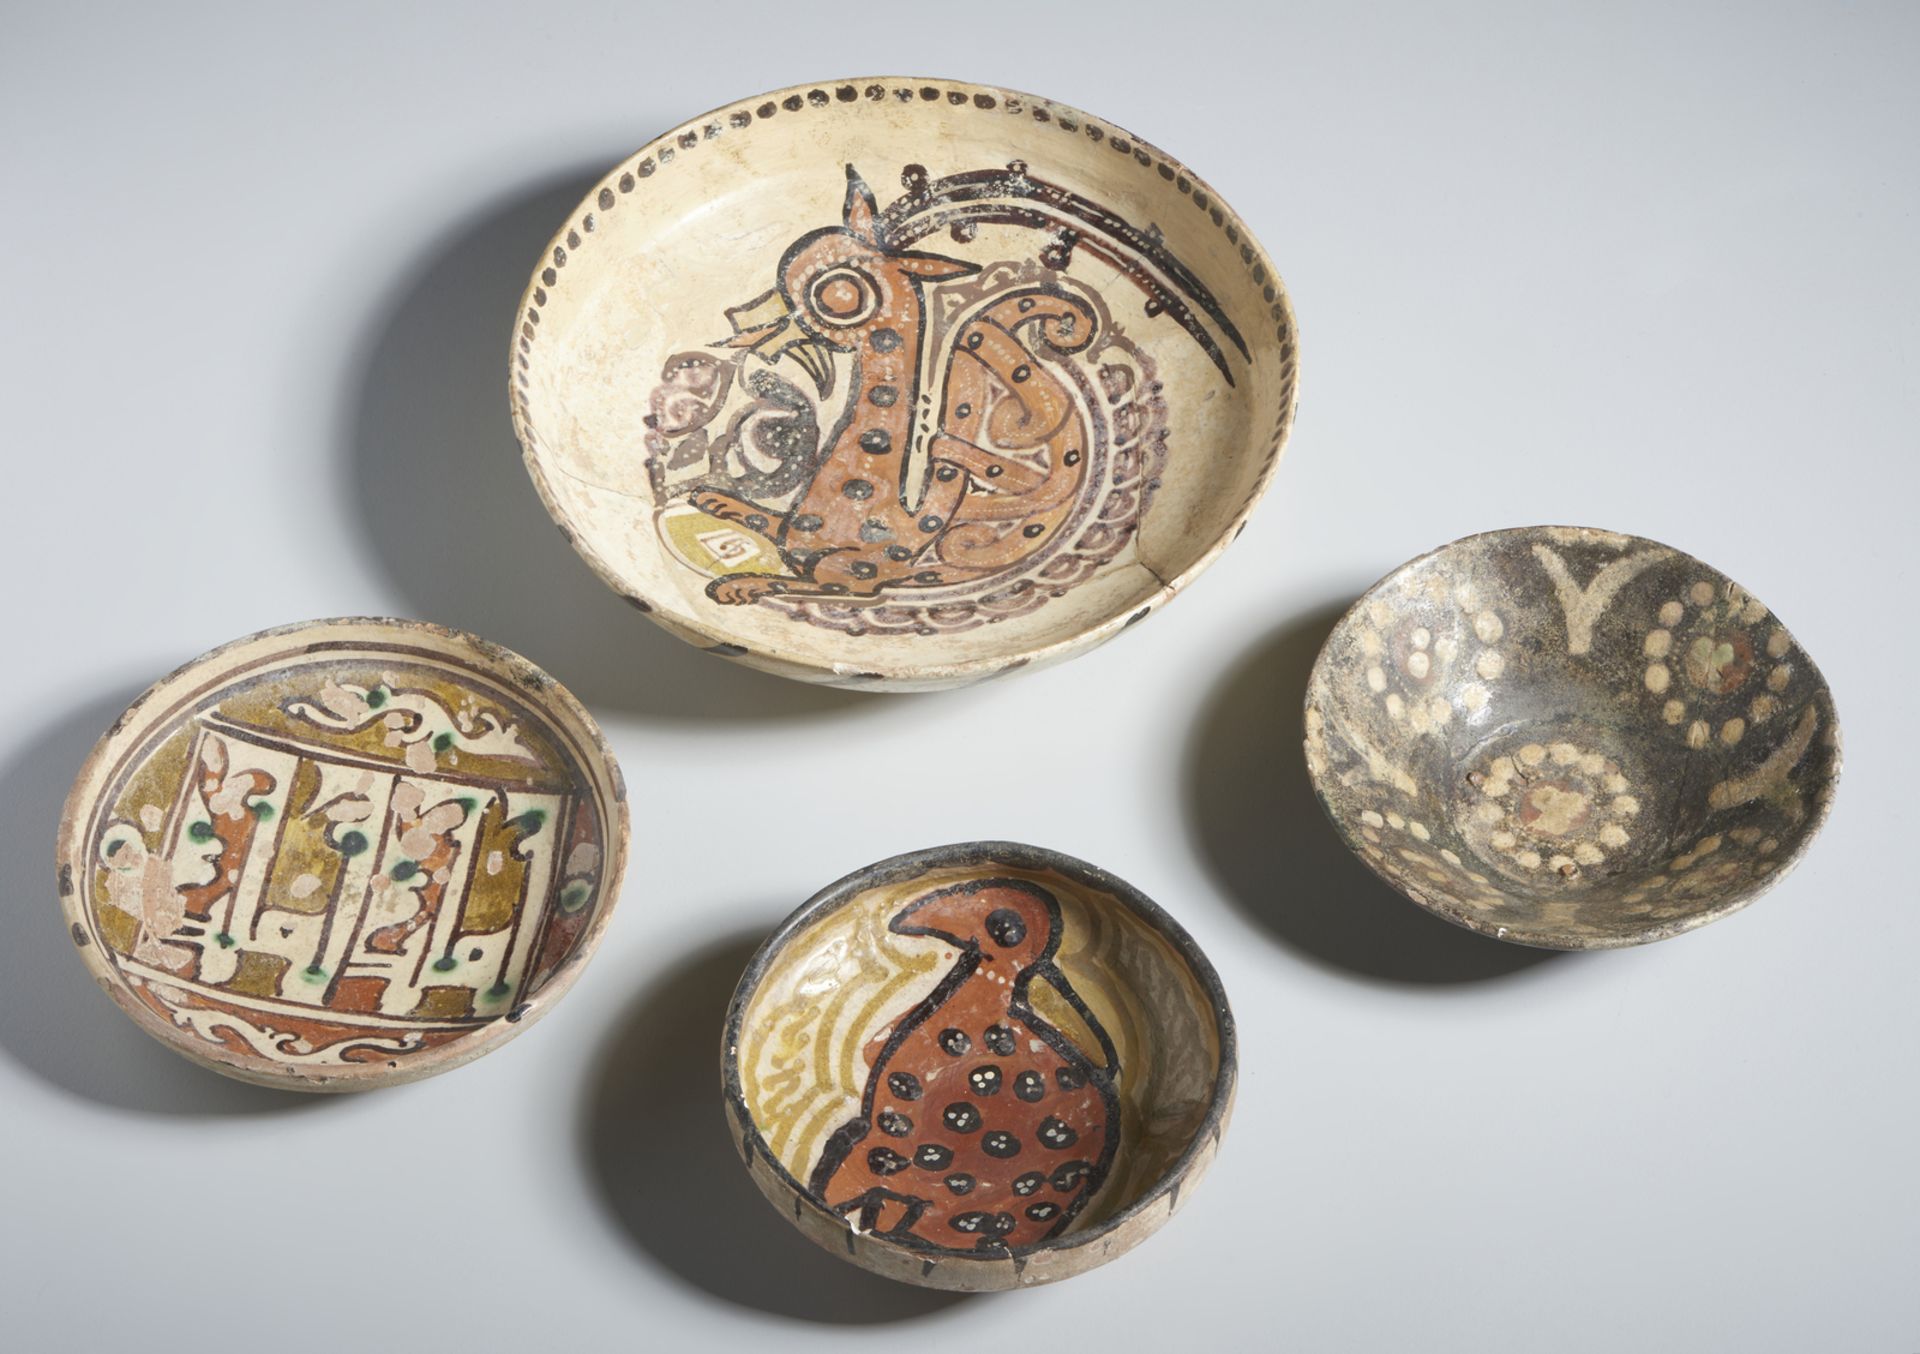 Group of 4 slip painted terracotta bowls Eastern Iranian World, 10th-11th century terracotta body, - Image 2 of 3